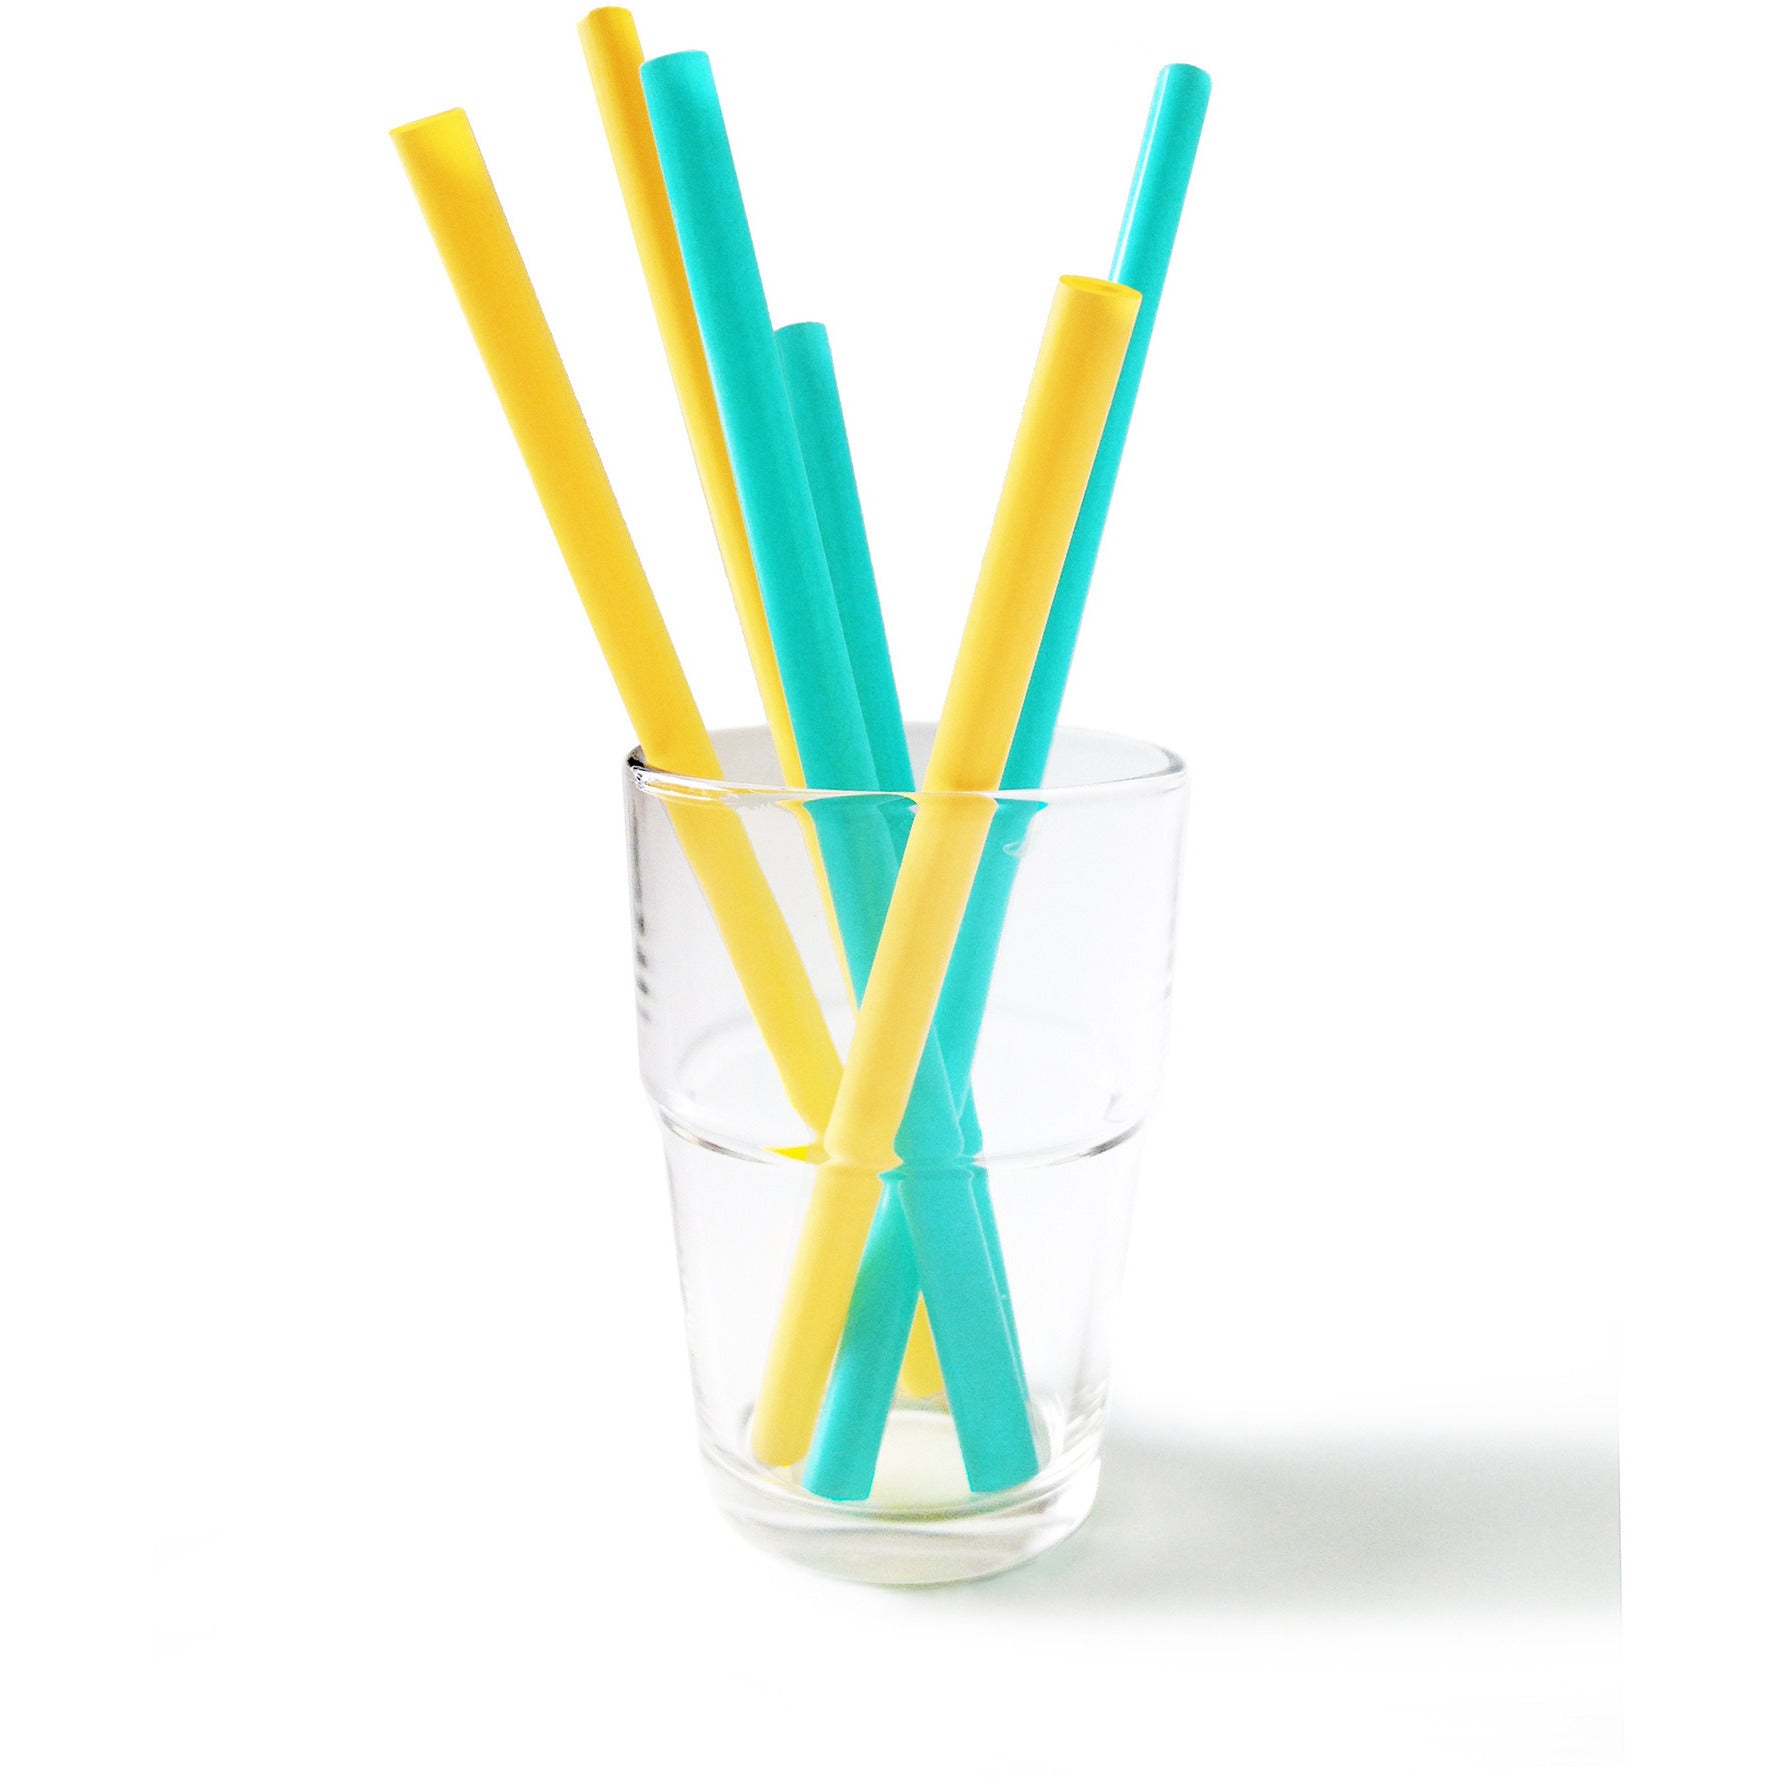 Silikids Reusable Silicone Straws - Lil Tulips - 3